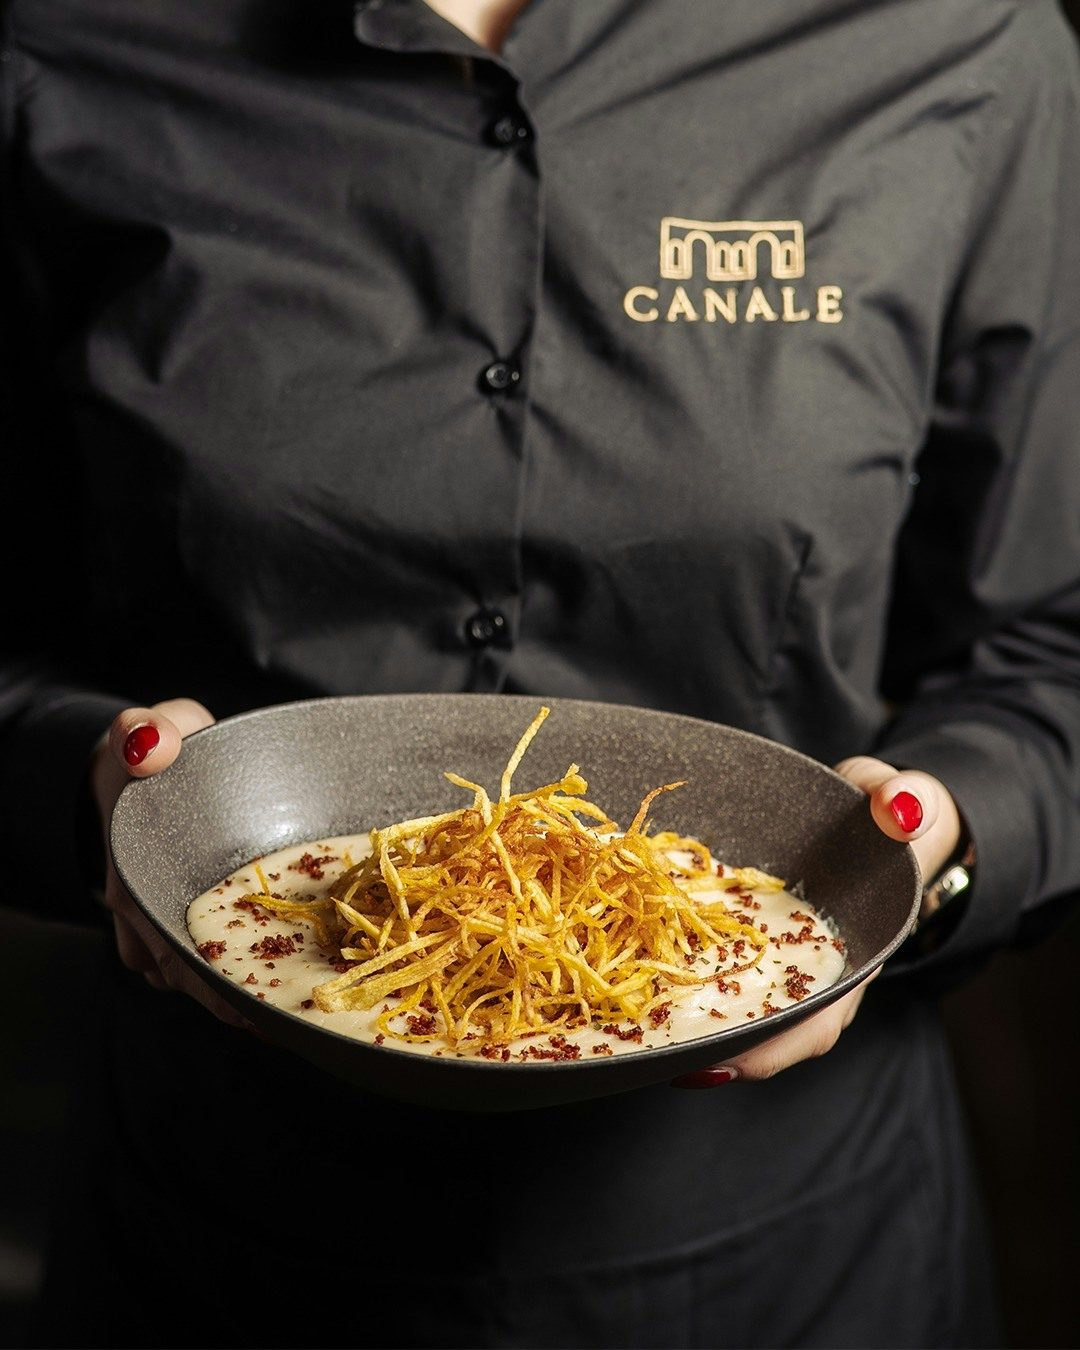 Canale Restaurant